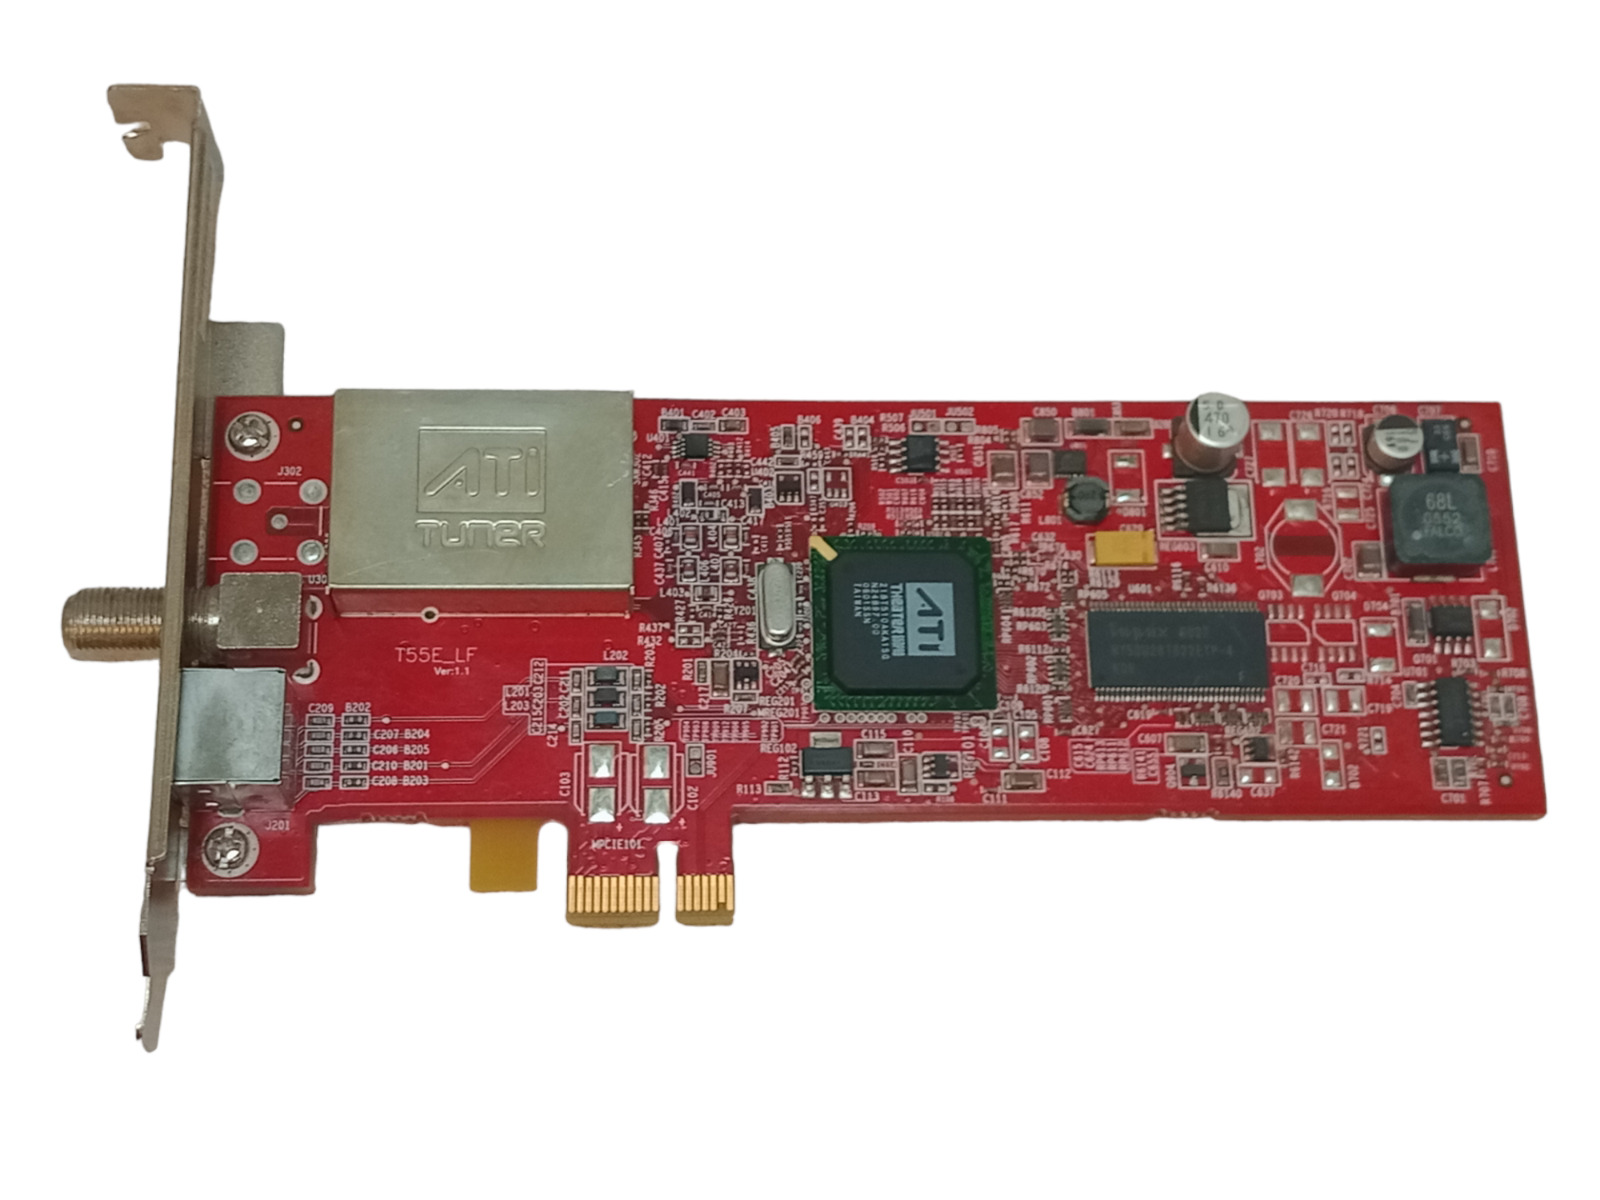 ATi Tuner T55E_LF Ver:1.1 PCIe TV Co-ax AV In Video Card | Tested Working